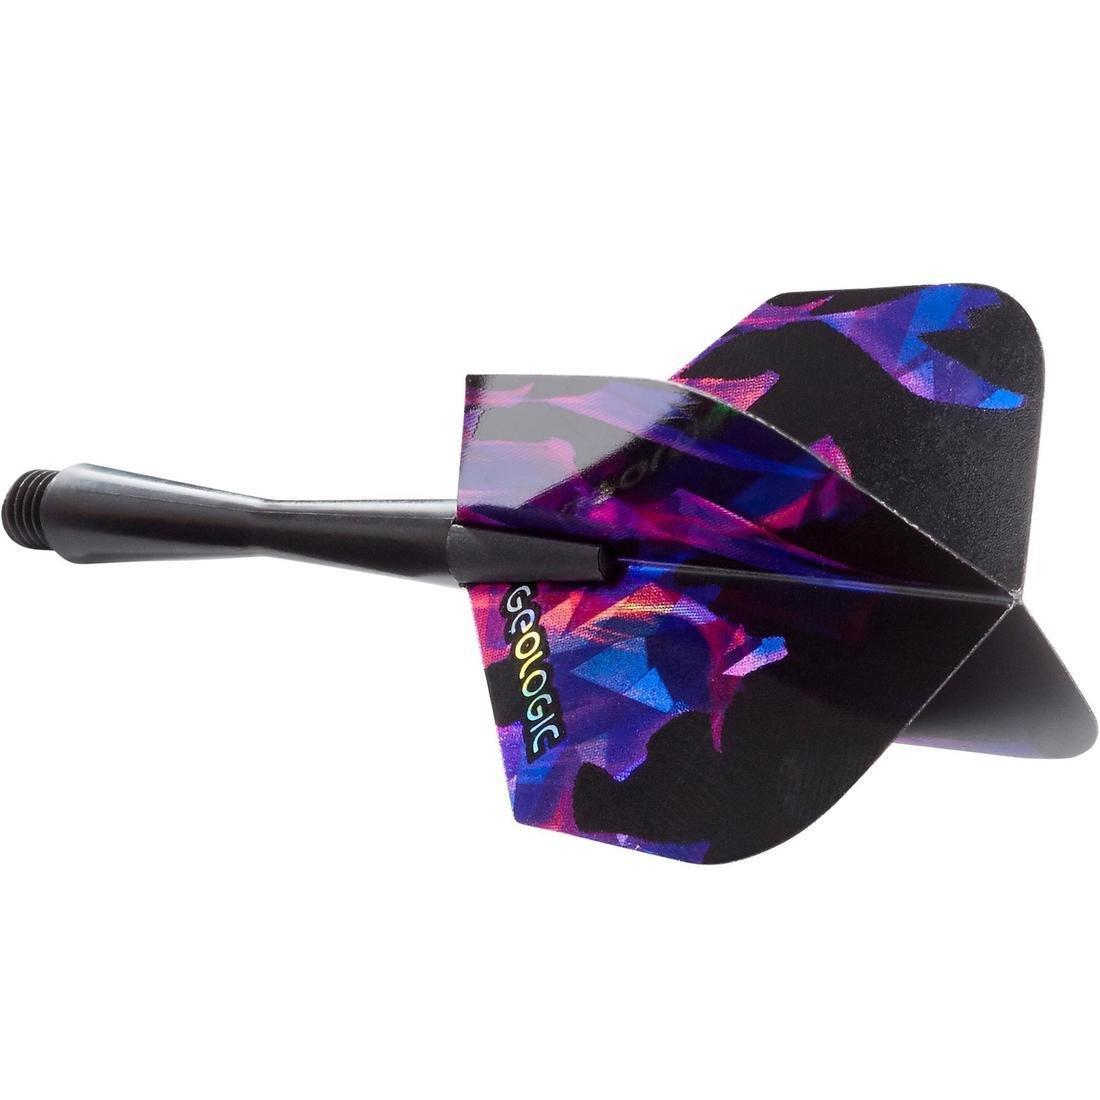 CANAVERAL - Standard Flames Flights 3 X Tri-Pack, Multicolour